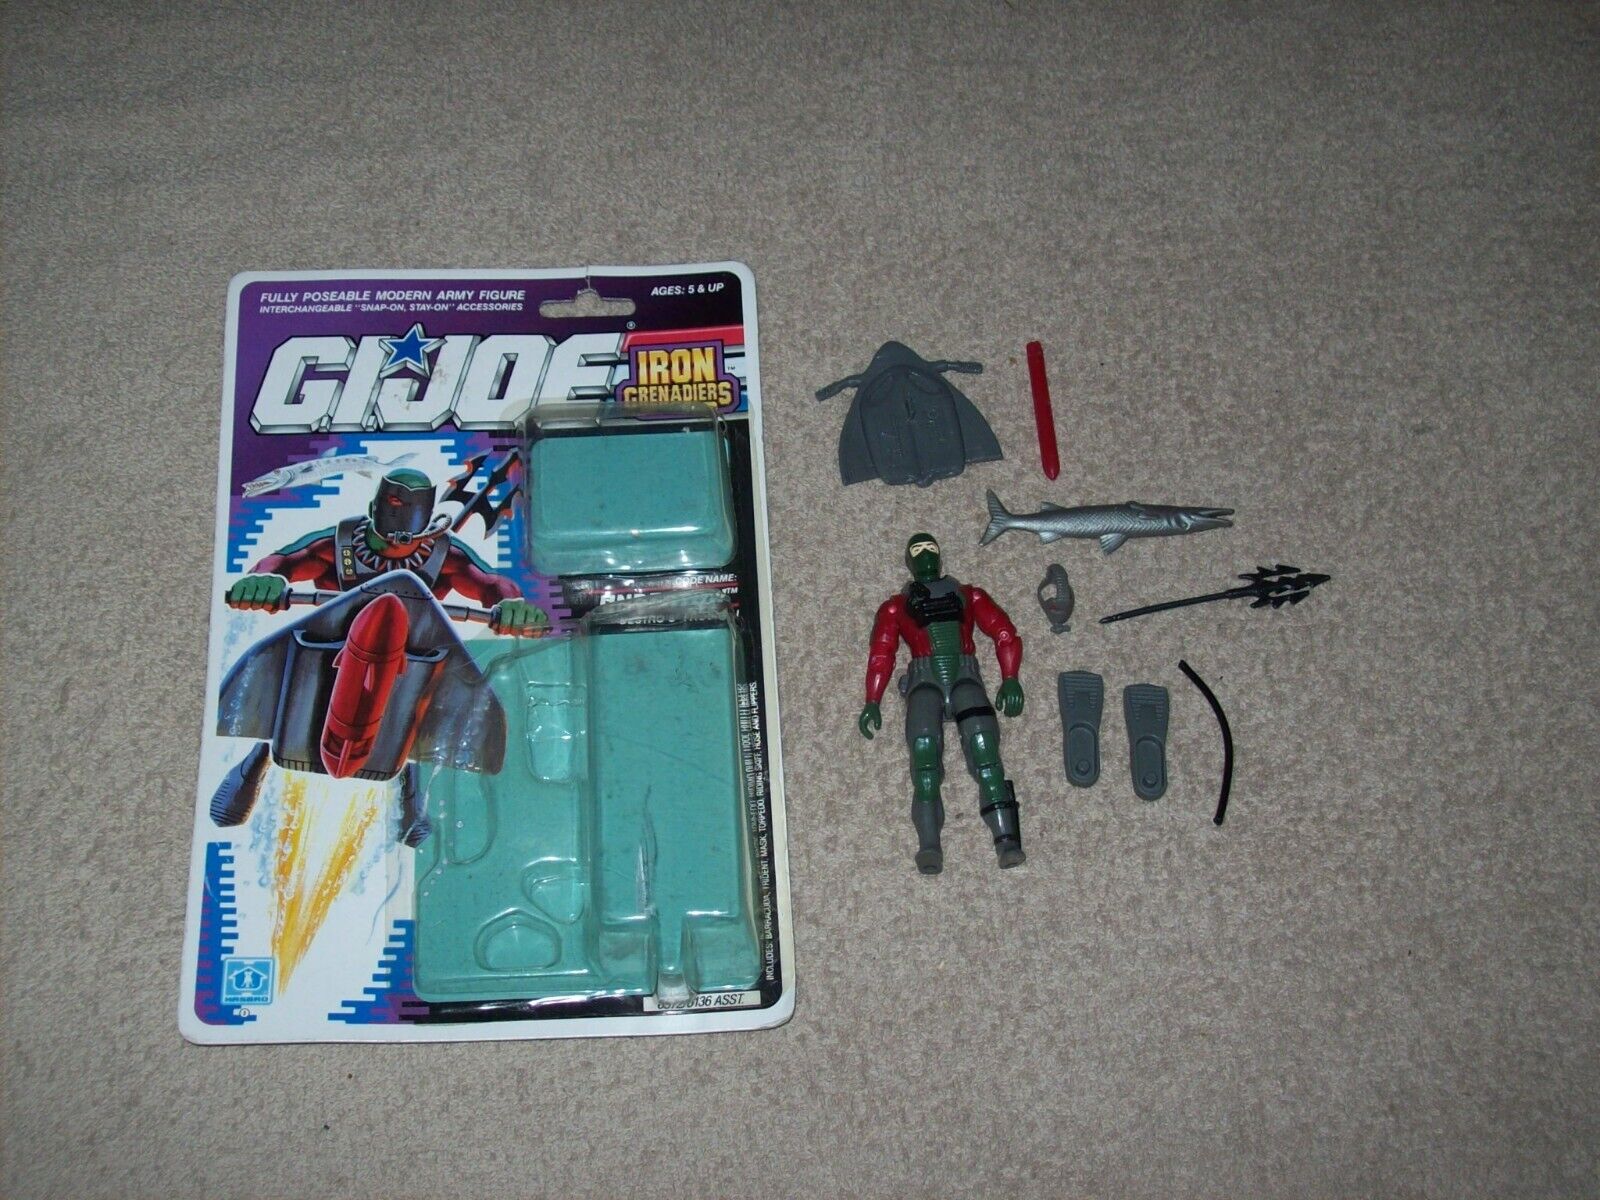 1990 Hasbro GI JOE Undertow Figure COMPLETE With Accessories & Backing Card